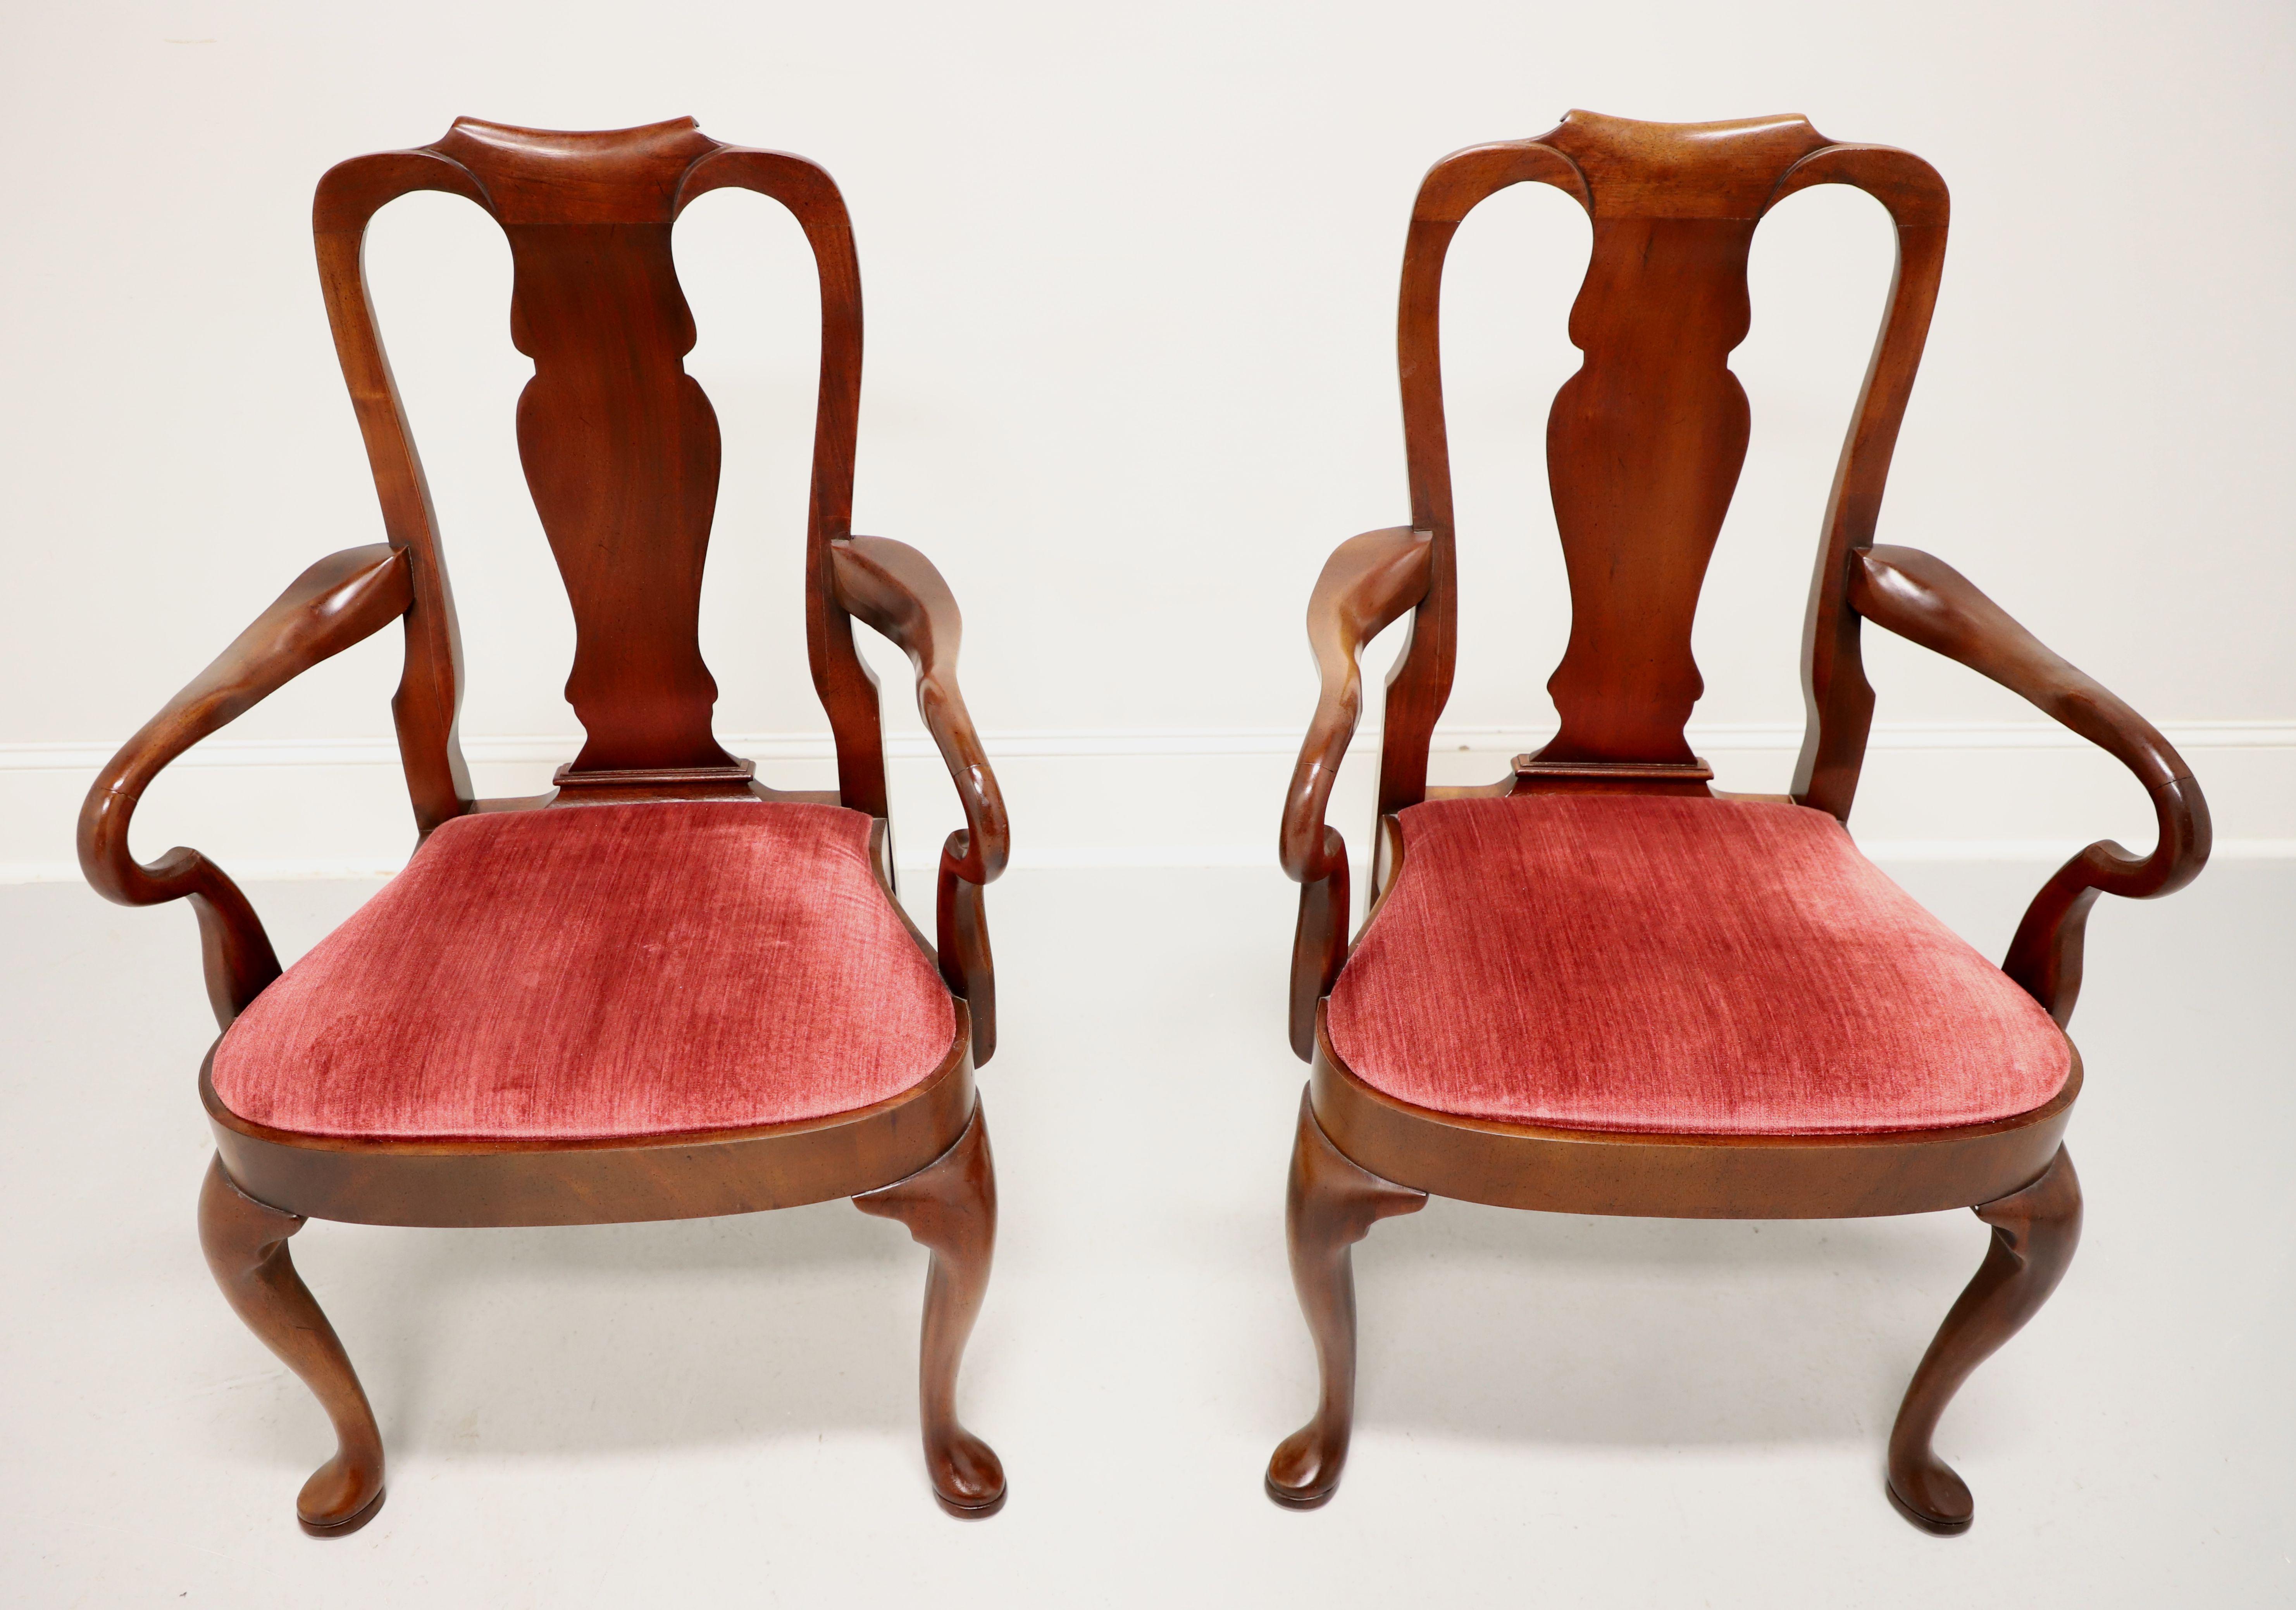 A pair of Queen Anne style dining armchairs by high-quality furniture maker Hickory Chair. Mahogany with solid carved back rest, curved arms & supports, a rose red color velvet fabric upholstered seat, rounded apron, cabriole legs and pad feet. Made